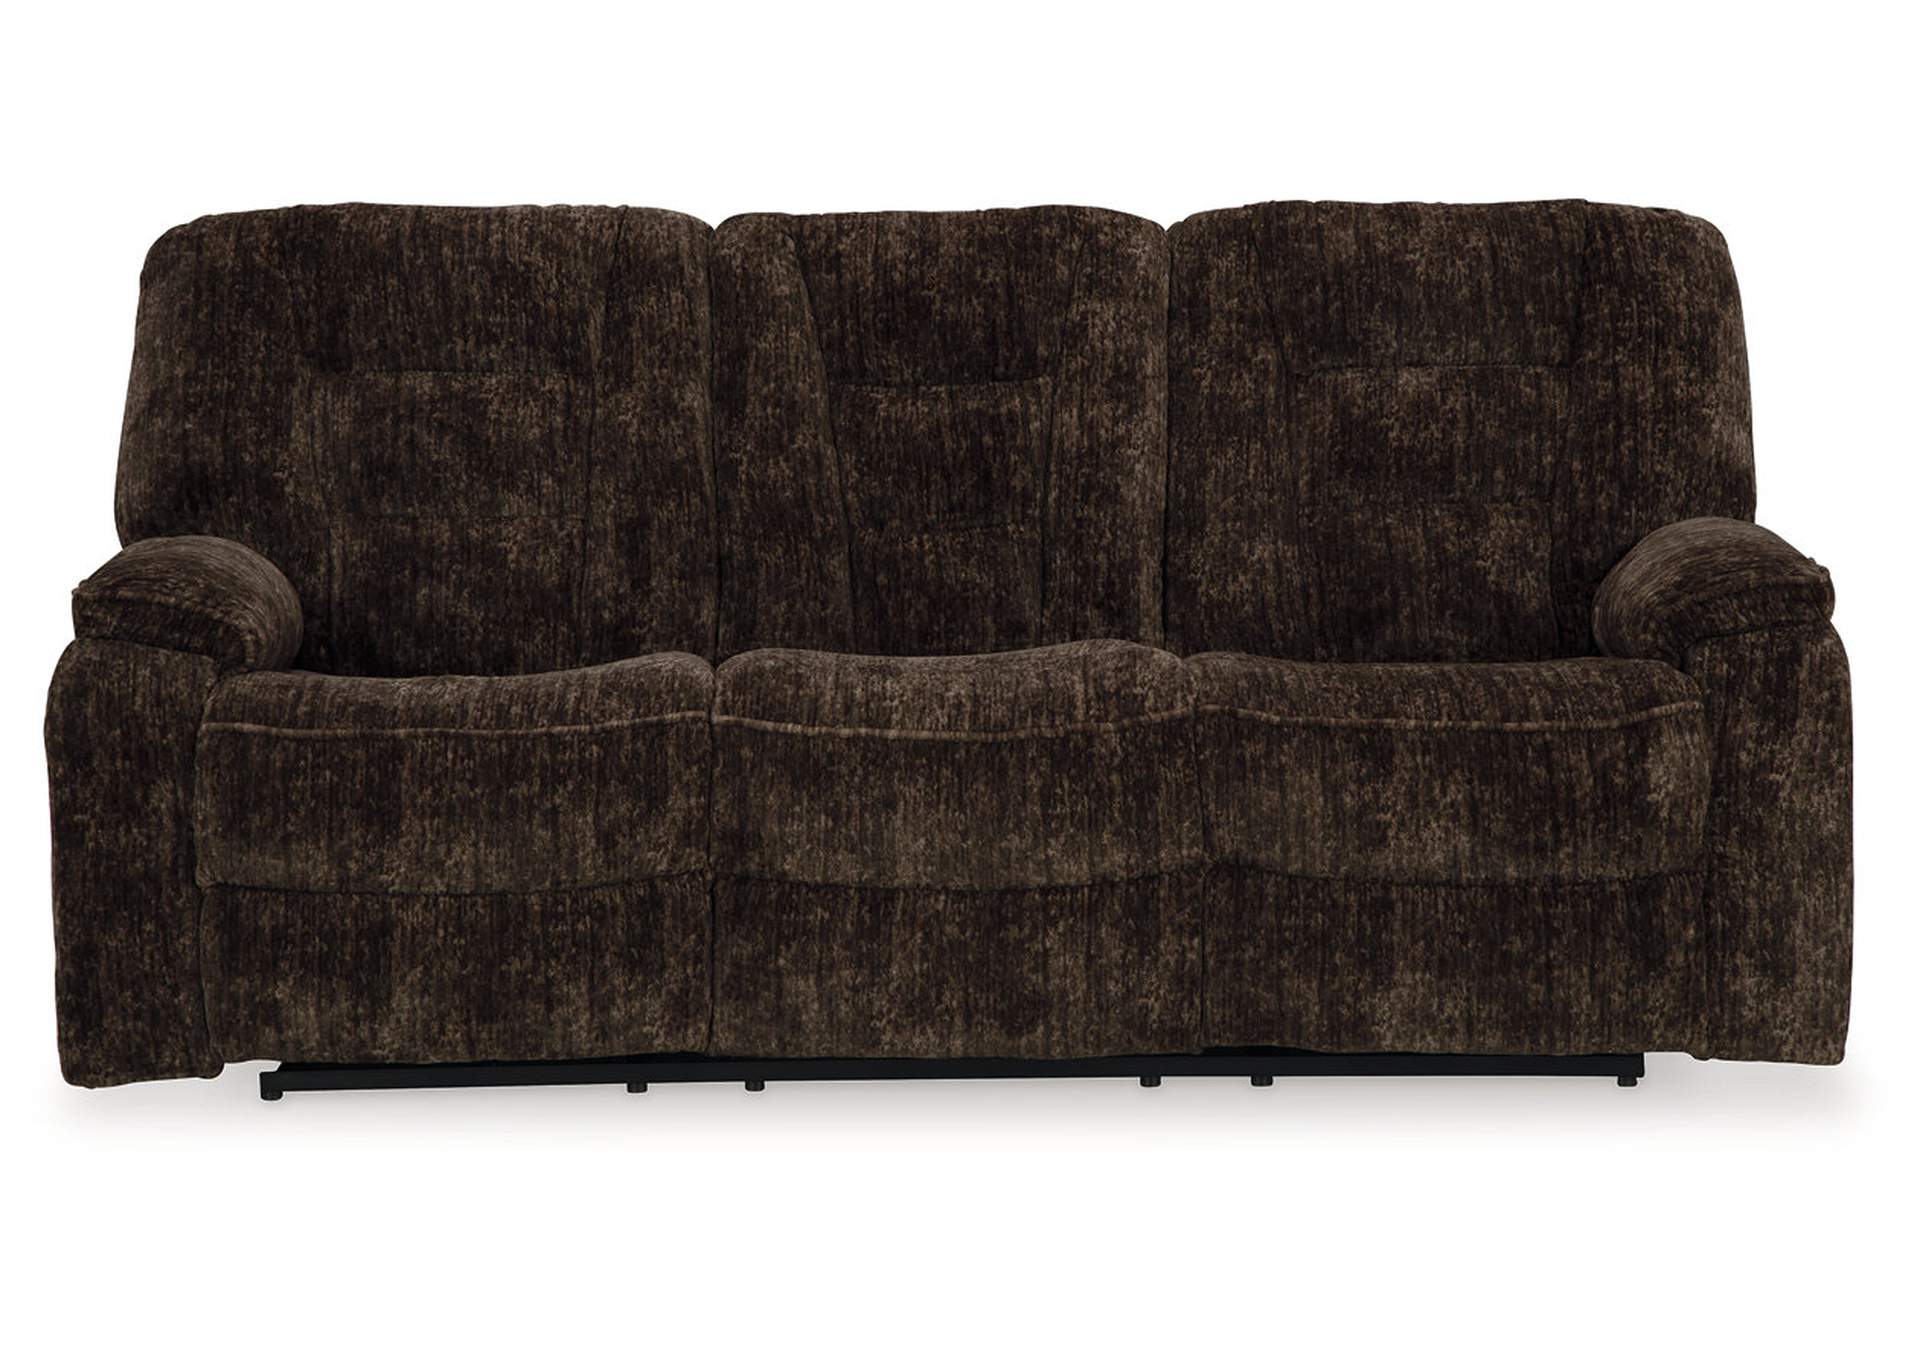 Soundwave Reclining Sofa with Drop Down Table,Signature Design By Ashley